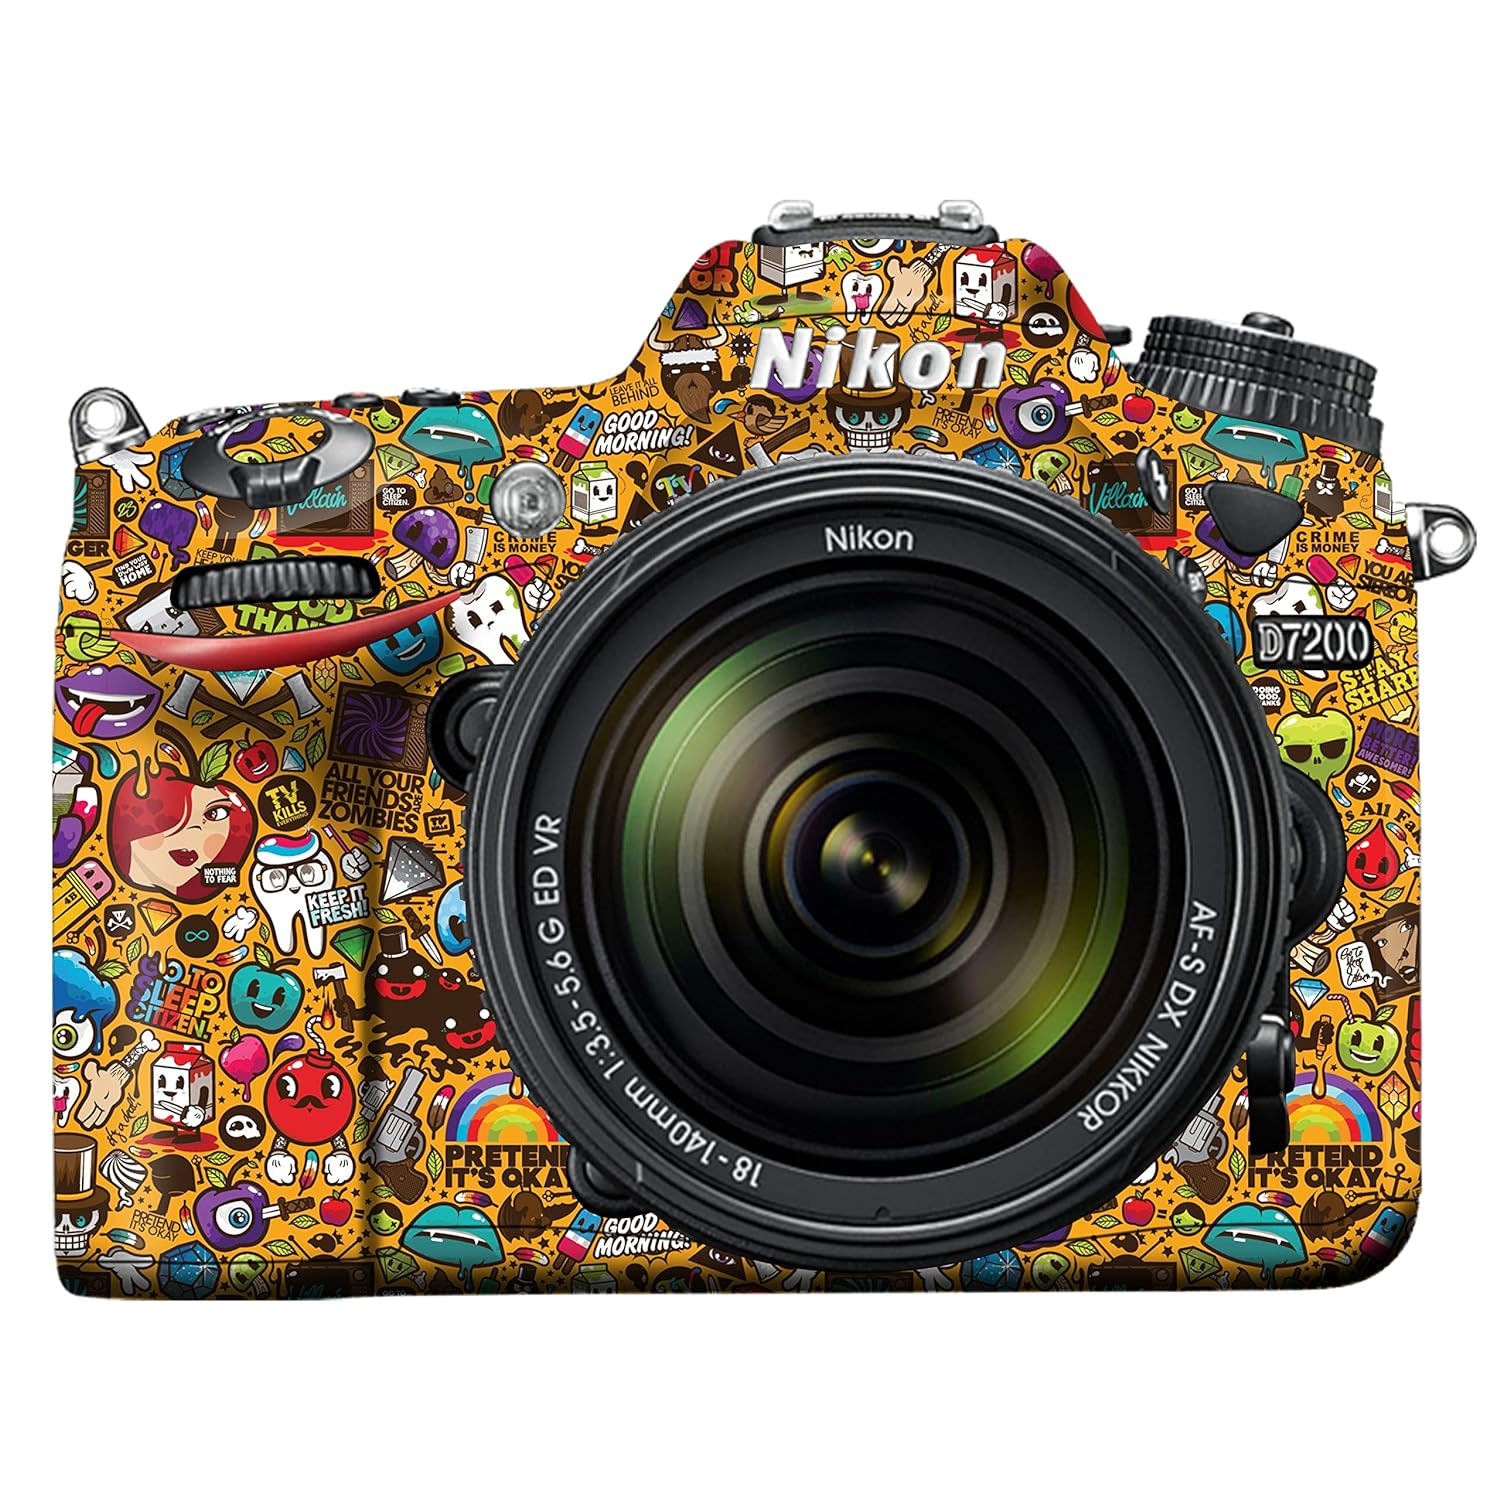 You are currently viewing WRAPTURE. Premium DSLR Camera Scratchproof Protective Skin for Nikon D7200 – No Residue Removal, Bubble Free, Scratch Resistant, Stretchable, HD Quality Printed – Design 006